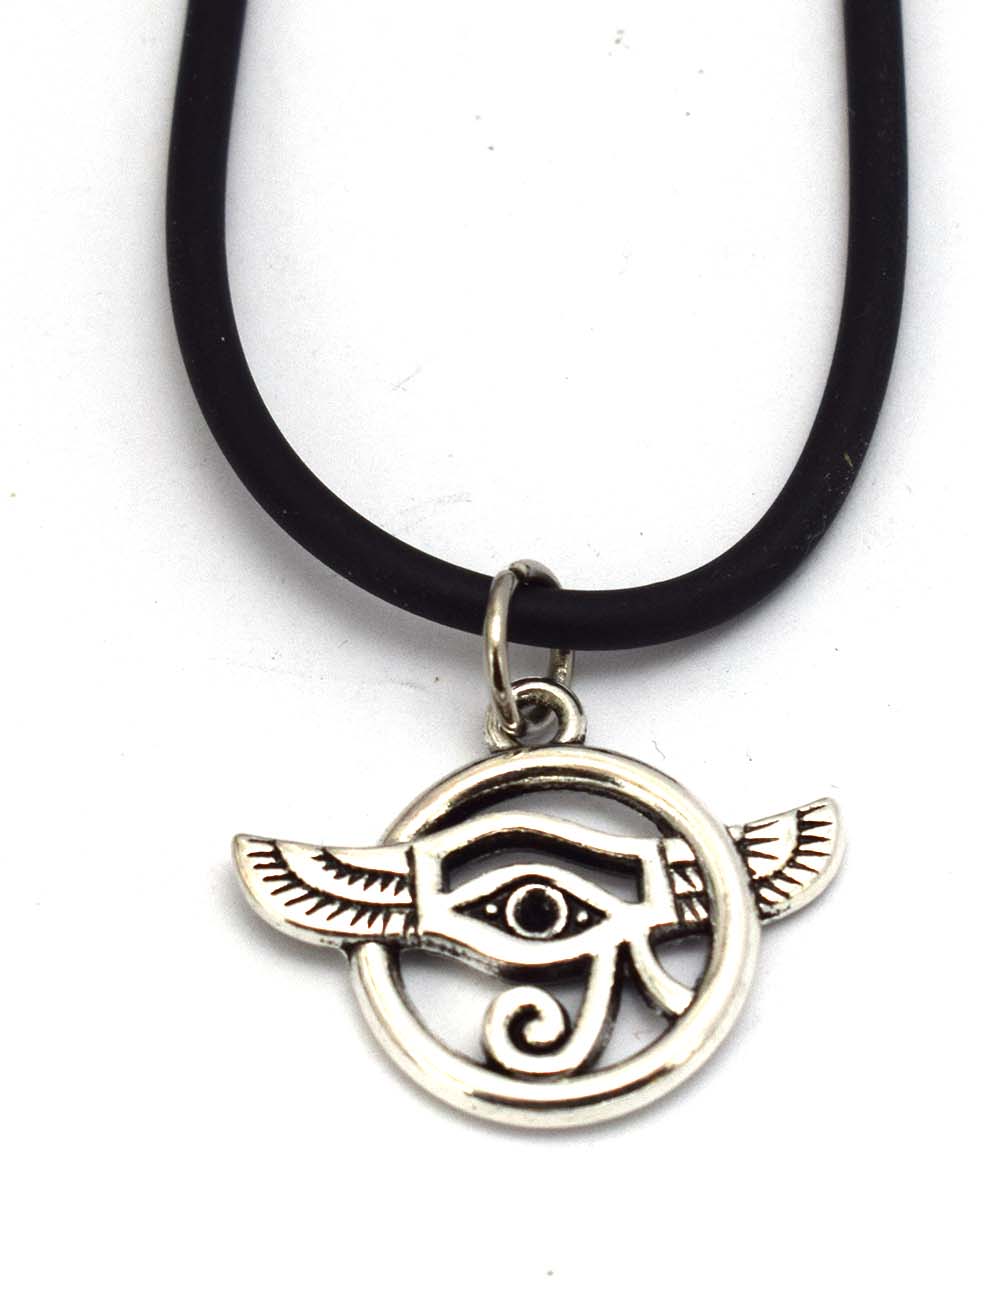 immatgar pharaonic Egyptian Eye Of Horus with wings necklace jewellery Egyptian souvenirs gifts for Women Girls ( Silver )